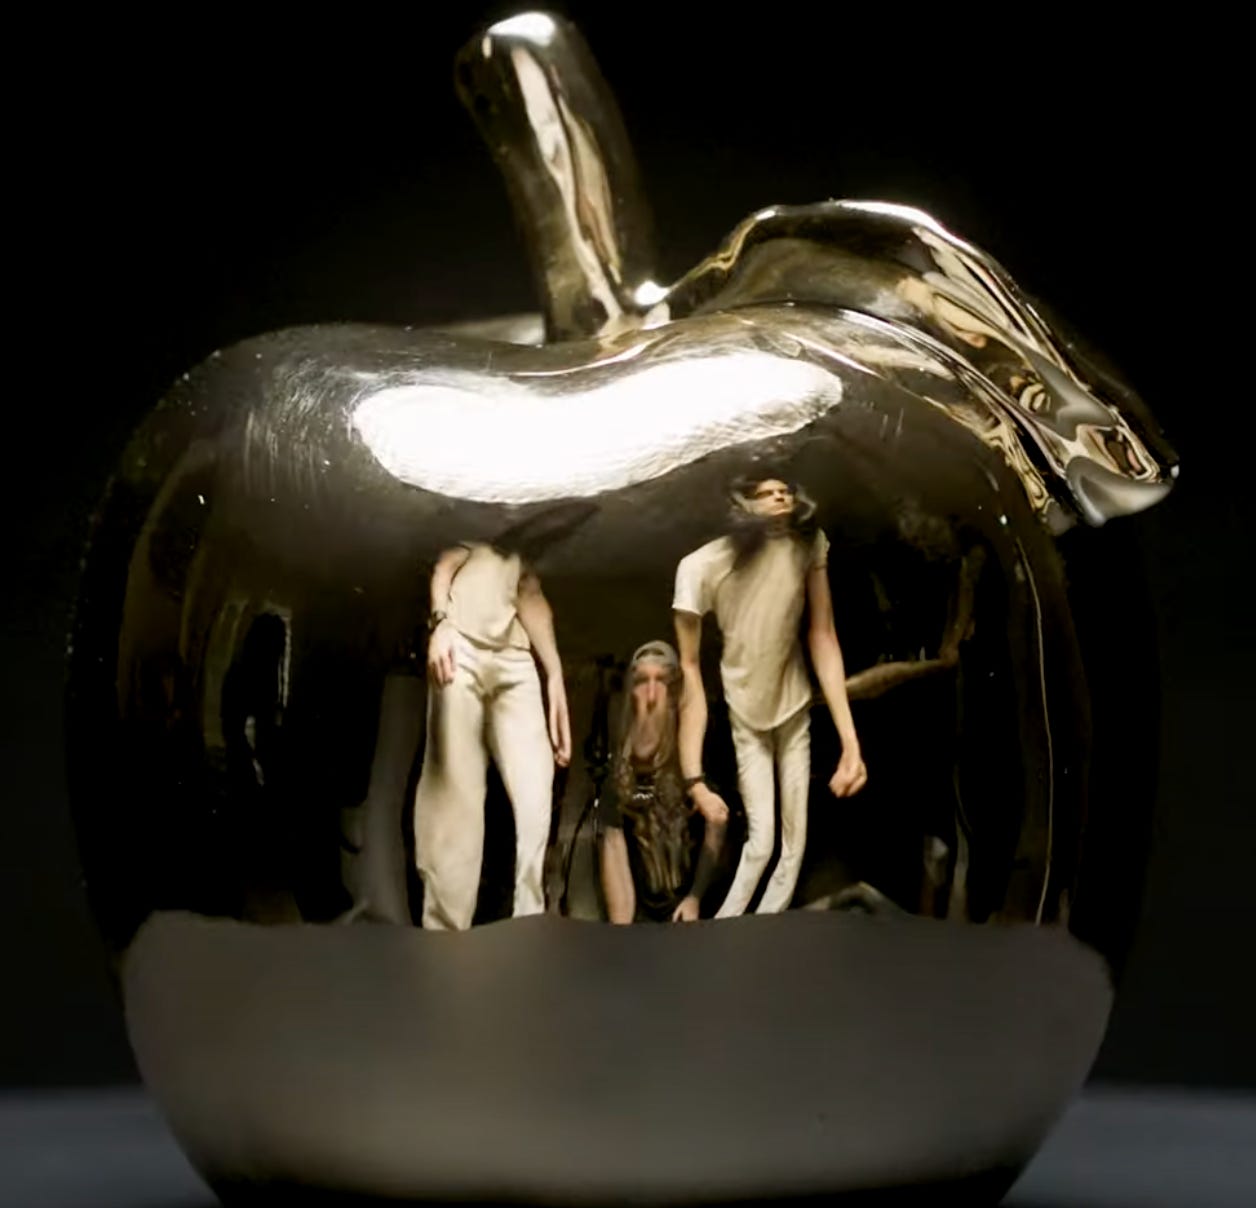 A shot of the reflective golden apple from Andrew WK's Babalon video